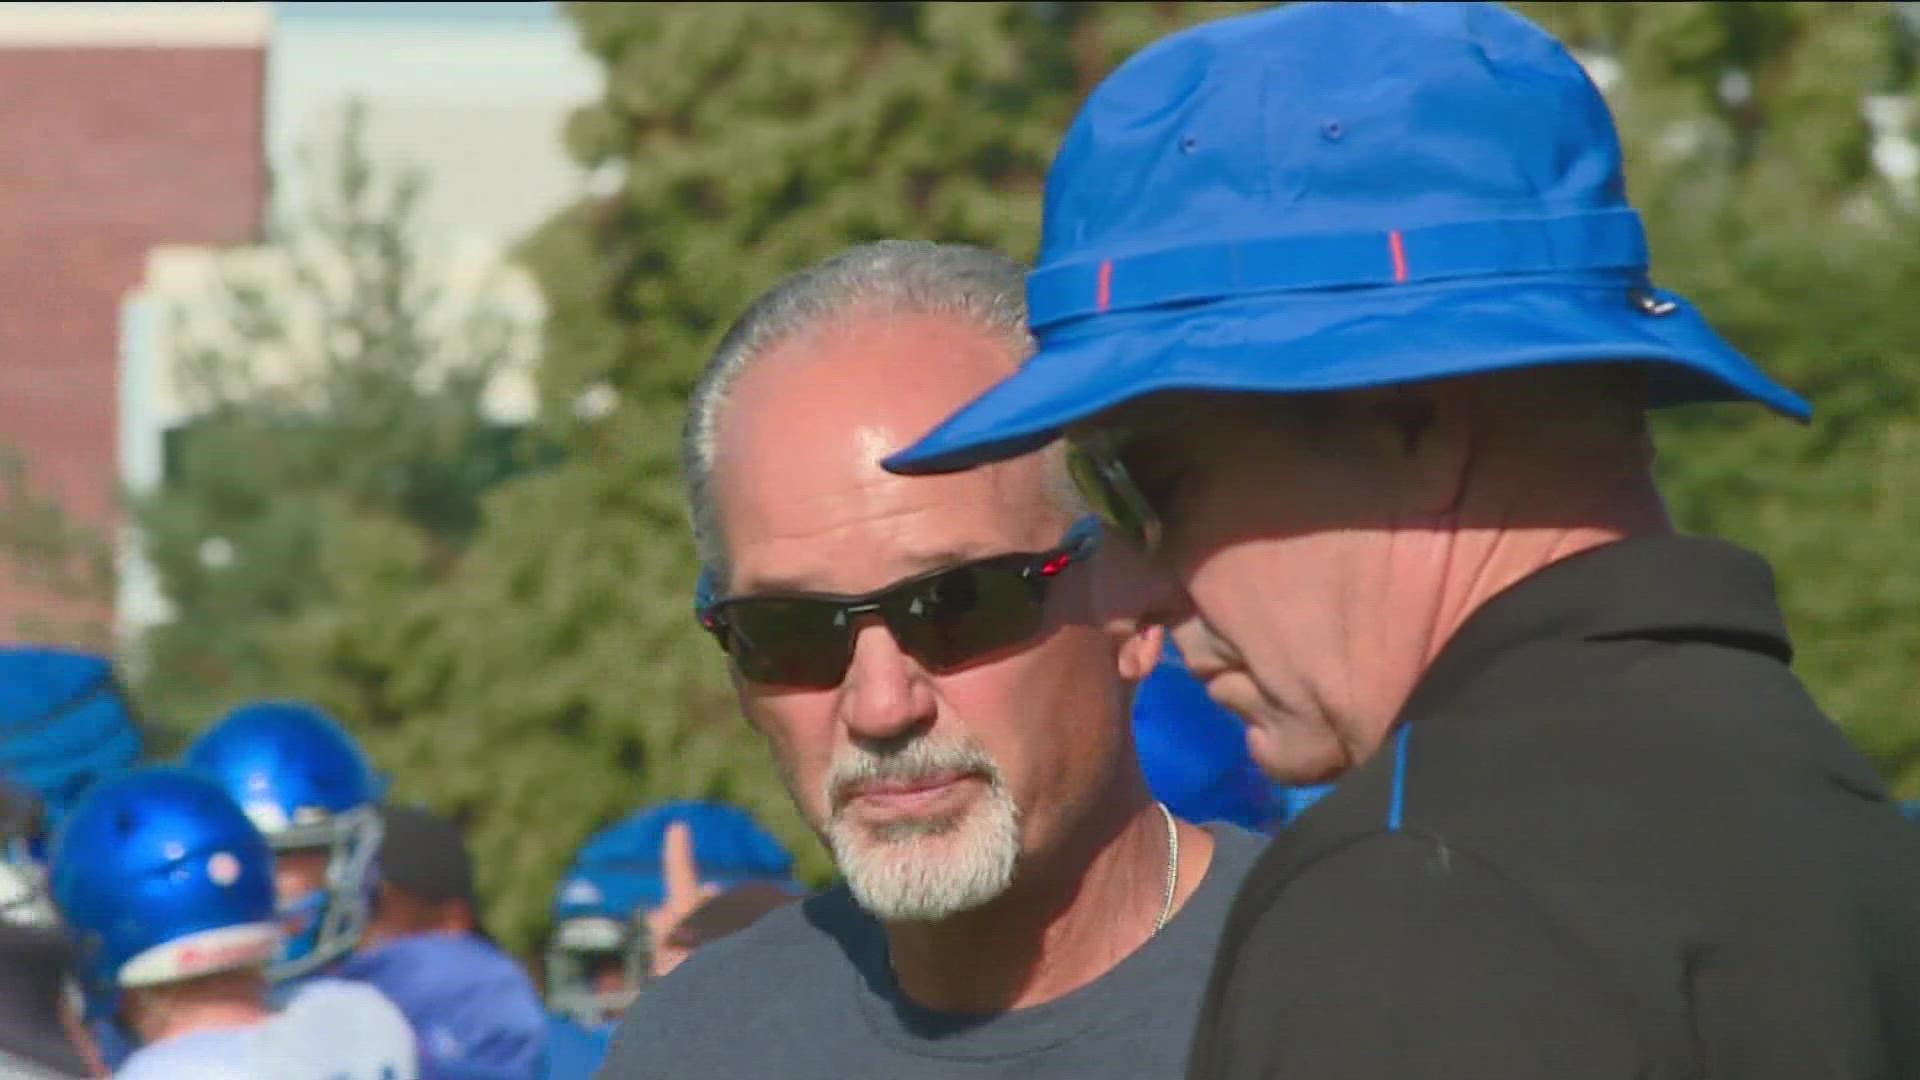 Legendary former NFL head coach Chuck Pagano has been hanging around his old stomping grounds recently, alongside new Boise State offensive analyst Dirk Koetter.